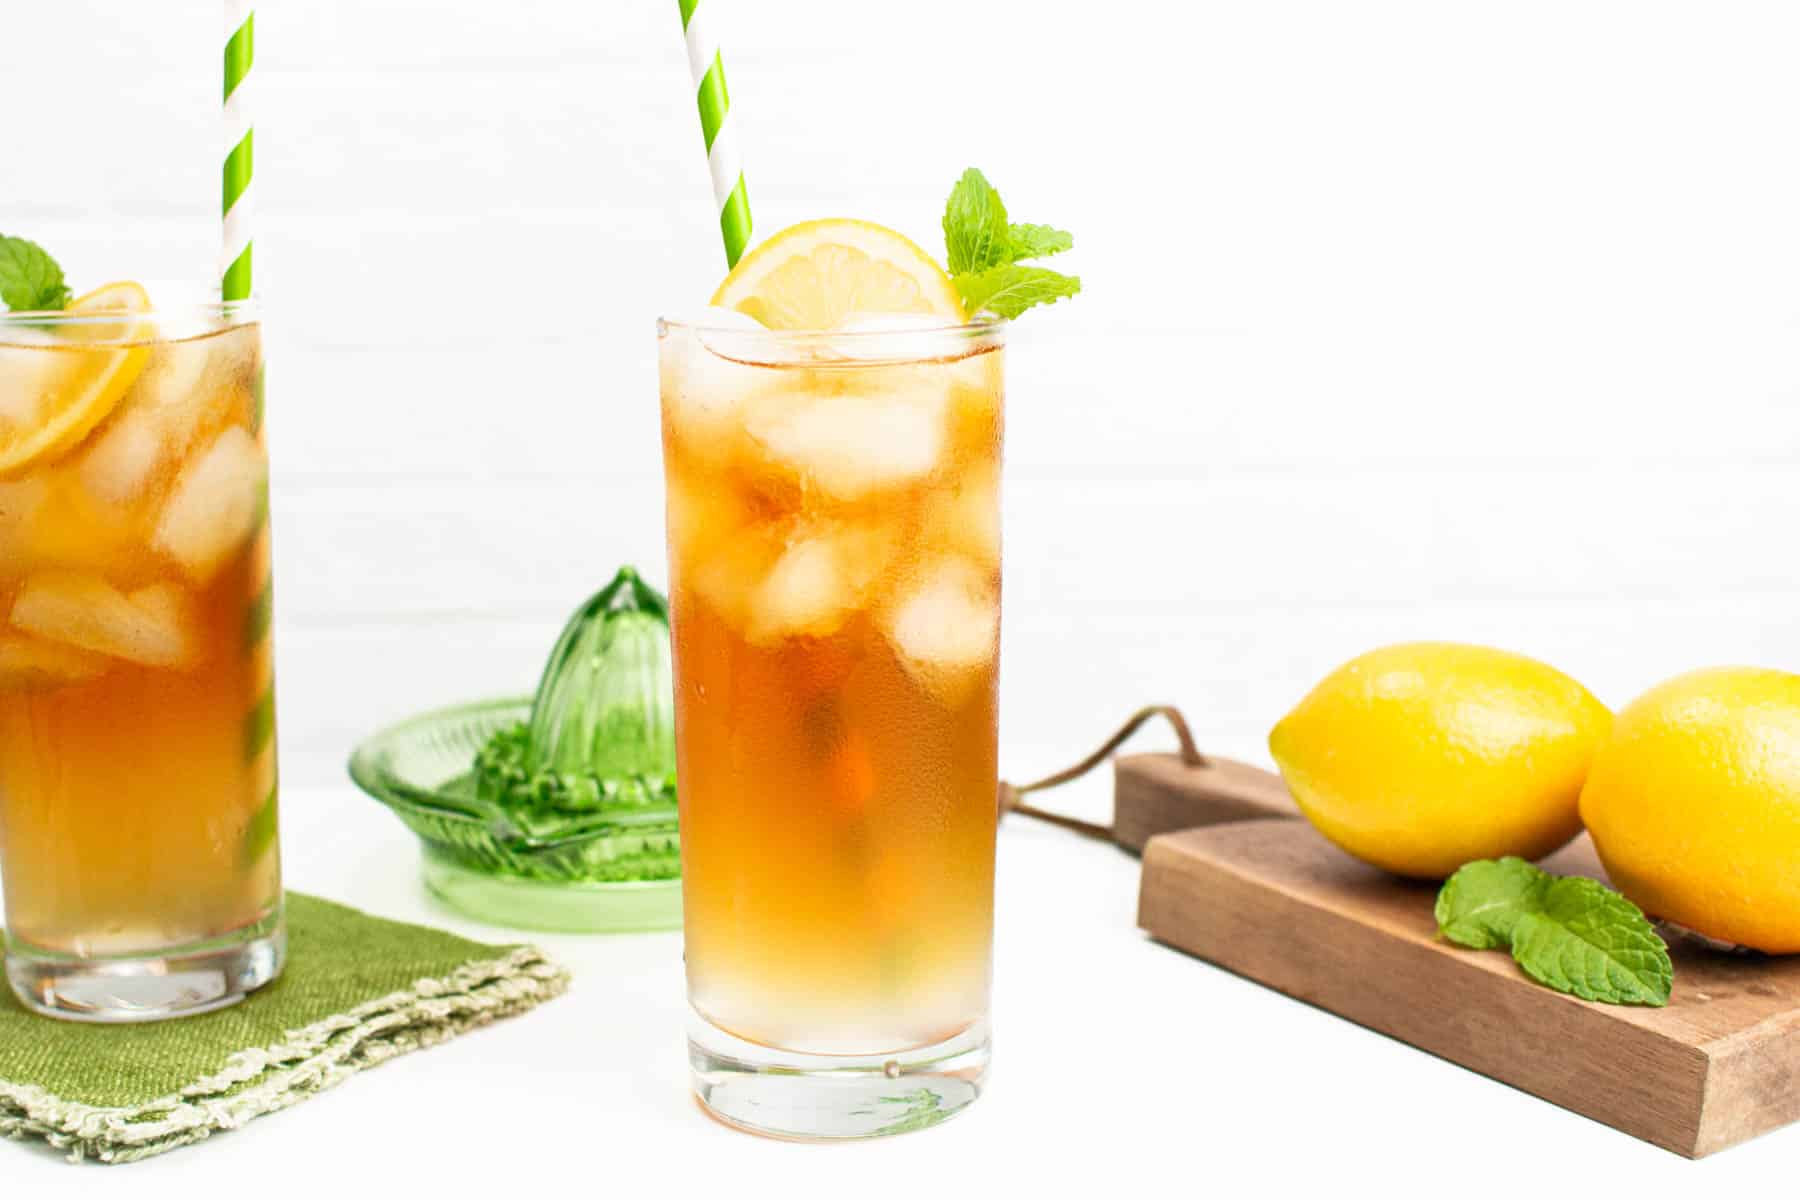 Arnold palmer drink on a white background.